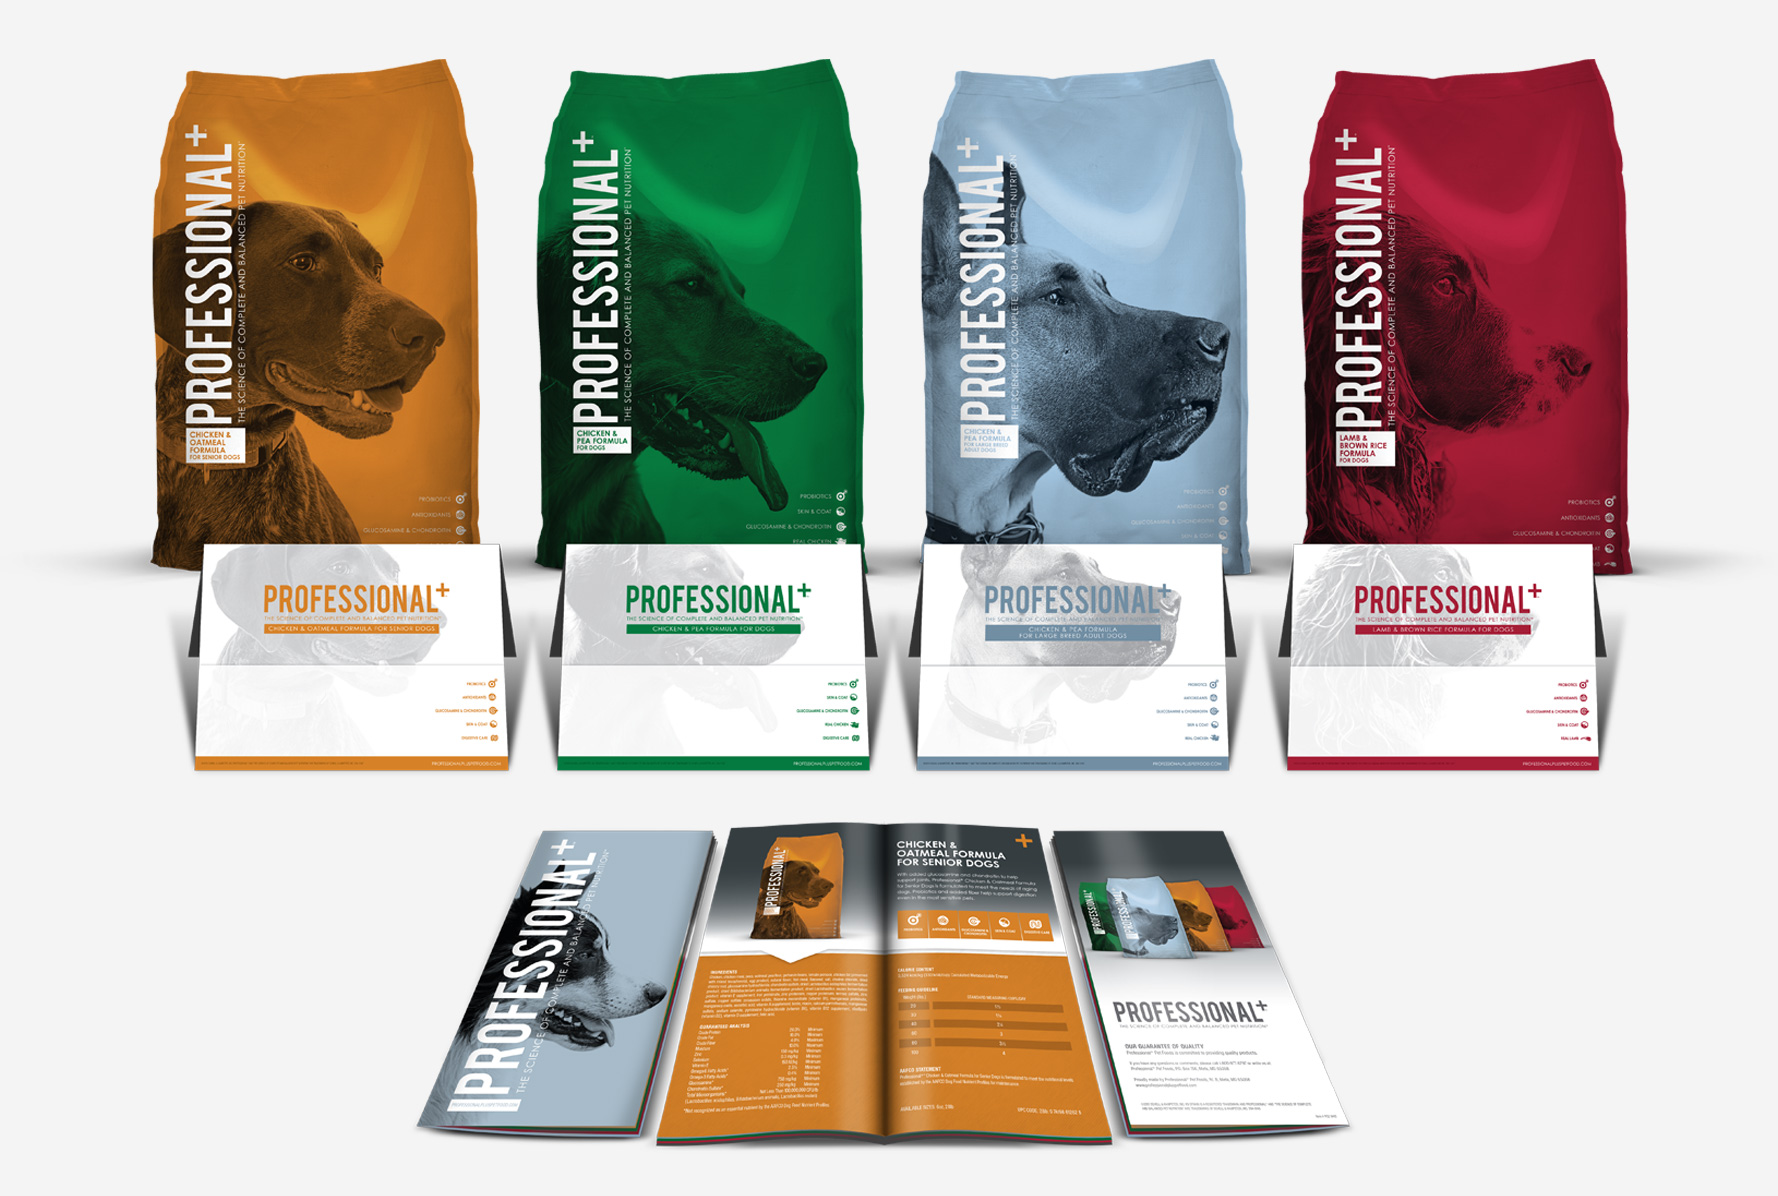 Professional+ Formula for dogs, new printed brochures for all formula for dogs